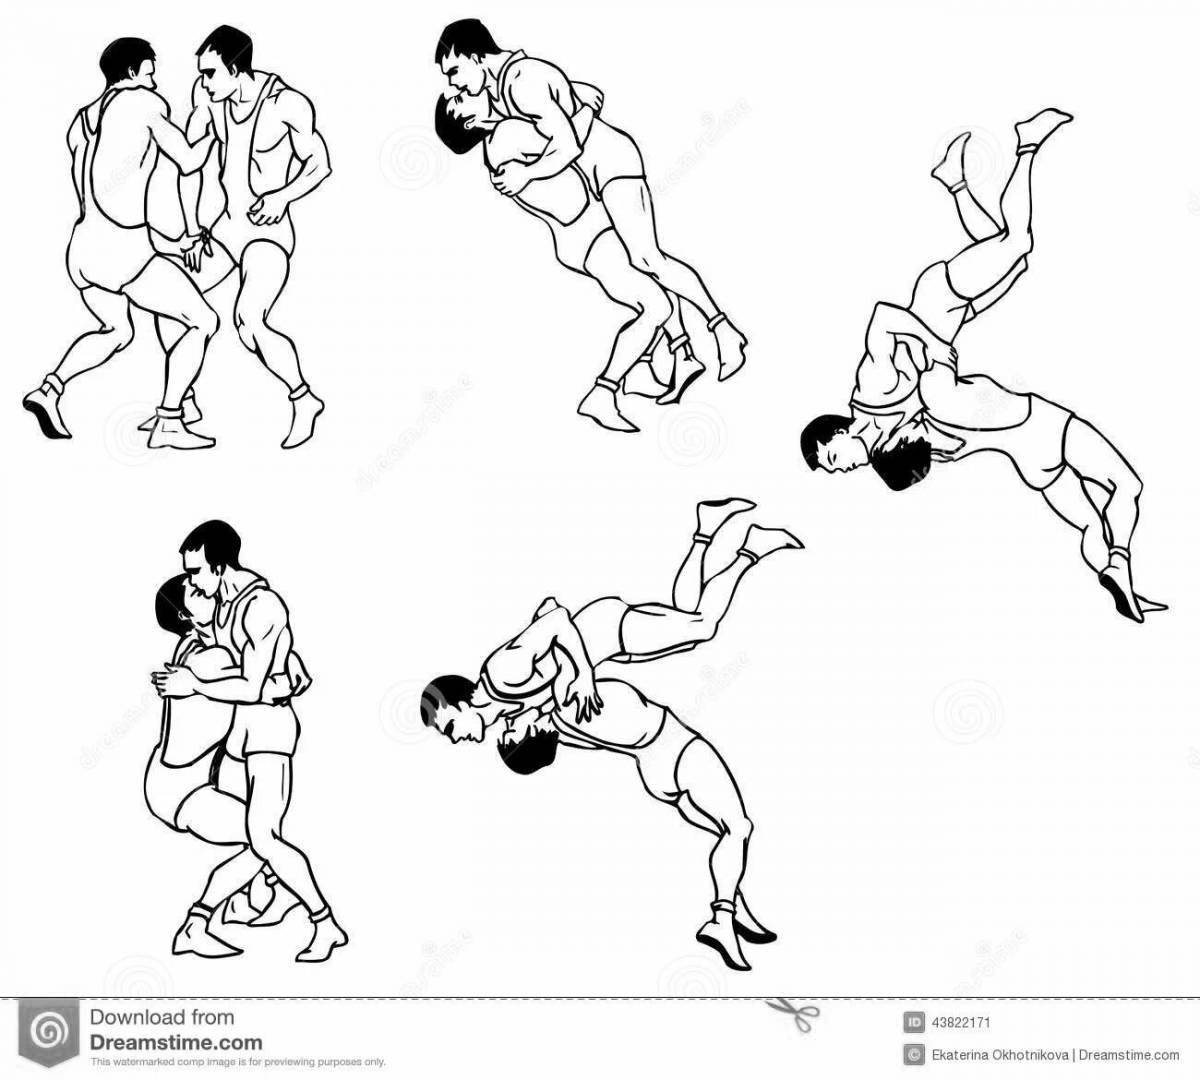 Fun freestyle wrestling coloring book